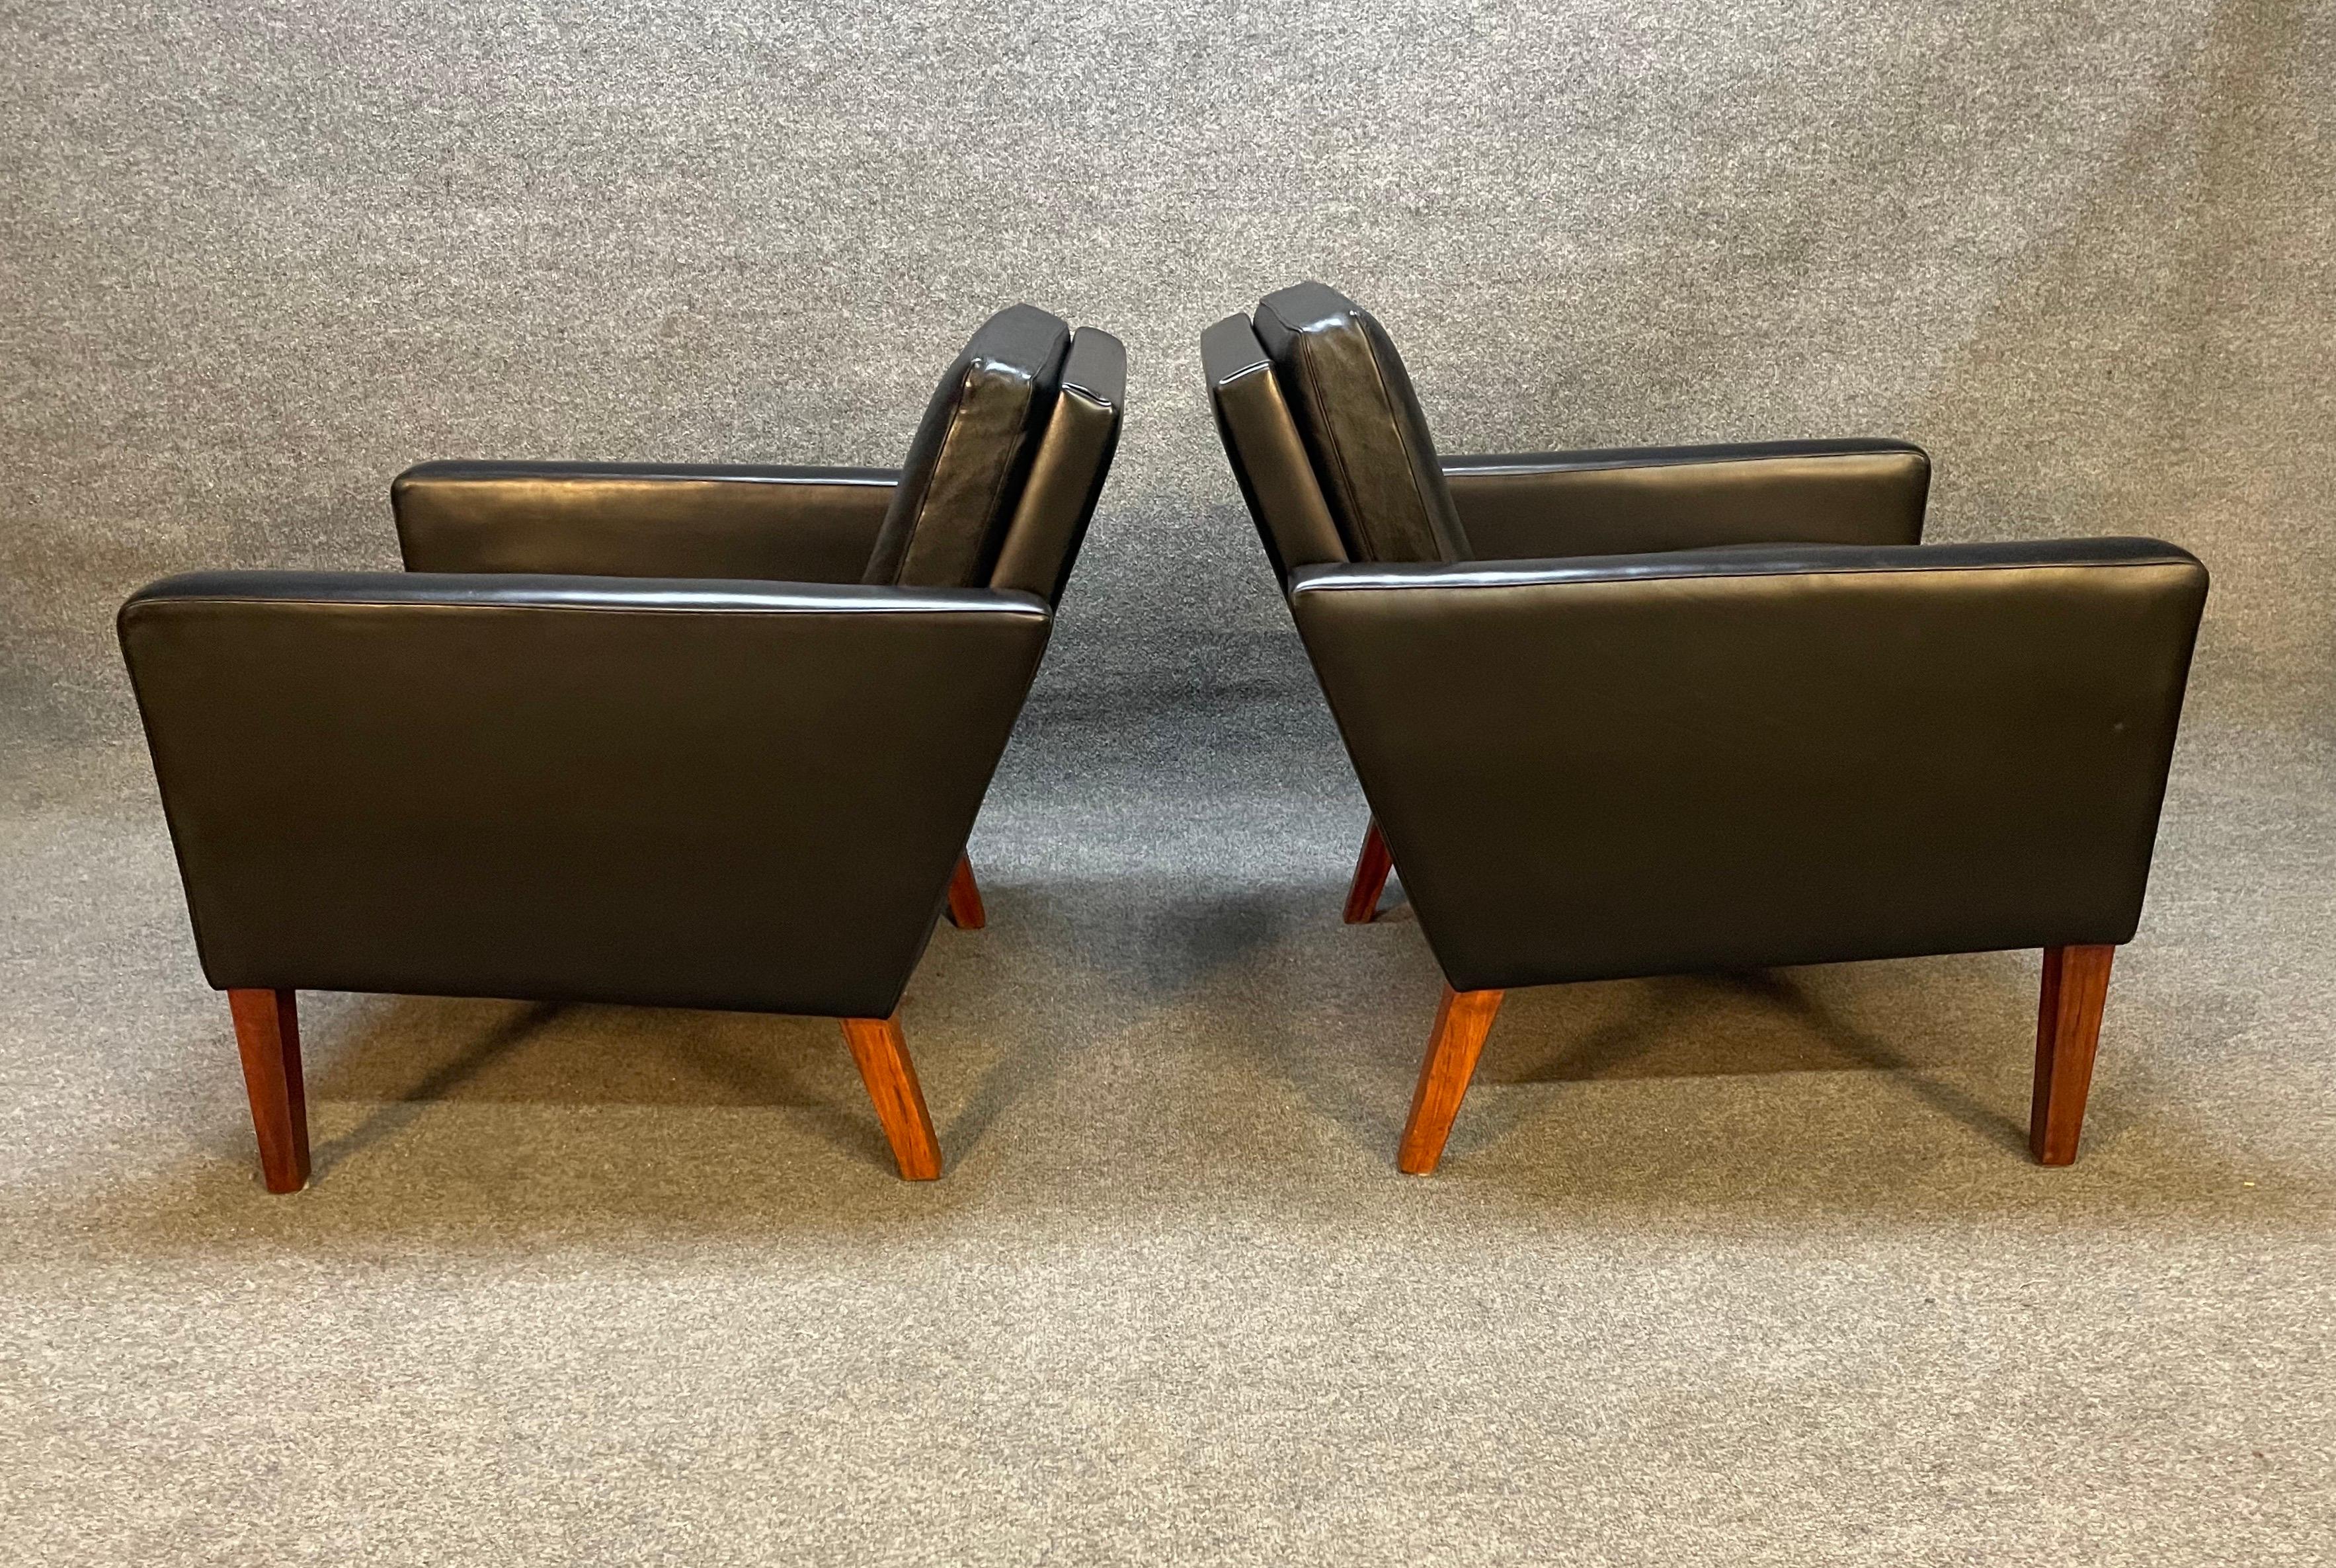 Woodwork Pair of Vintage Danish Mid-Century Modern Club Chairs in Leather and Rosewood